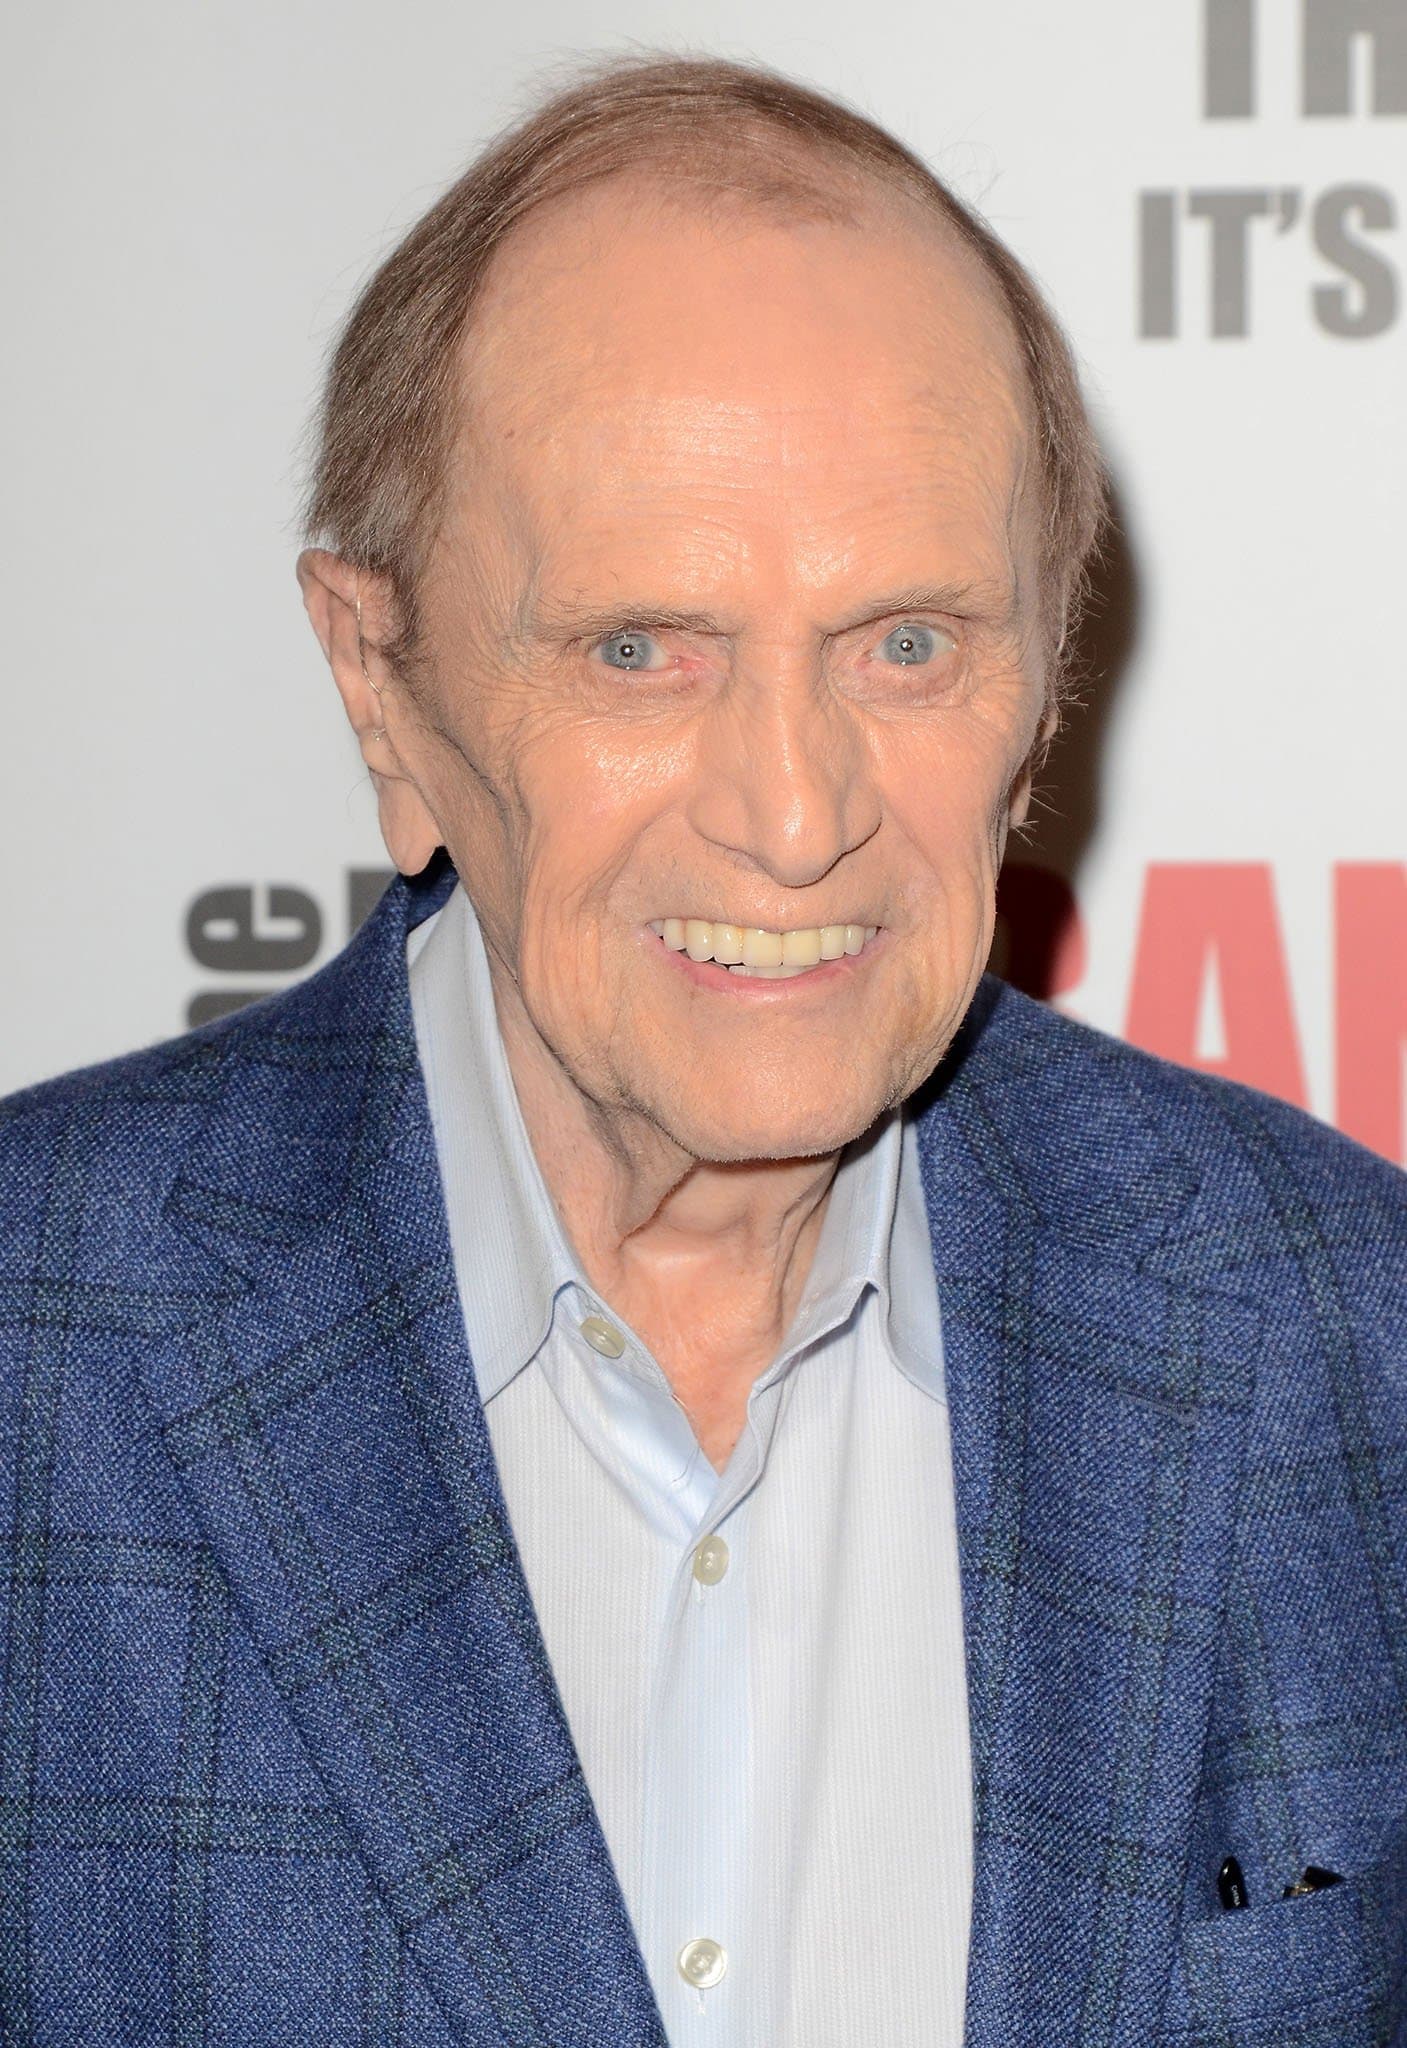 A household name in stand-up comedy, Grammy and Emmy winner Bob Newhart is known for his deadpan and slightly stammering delivery style